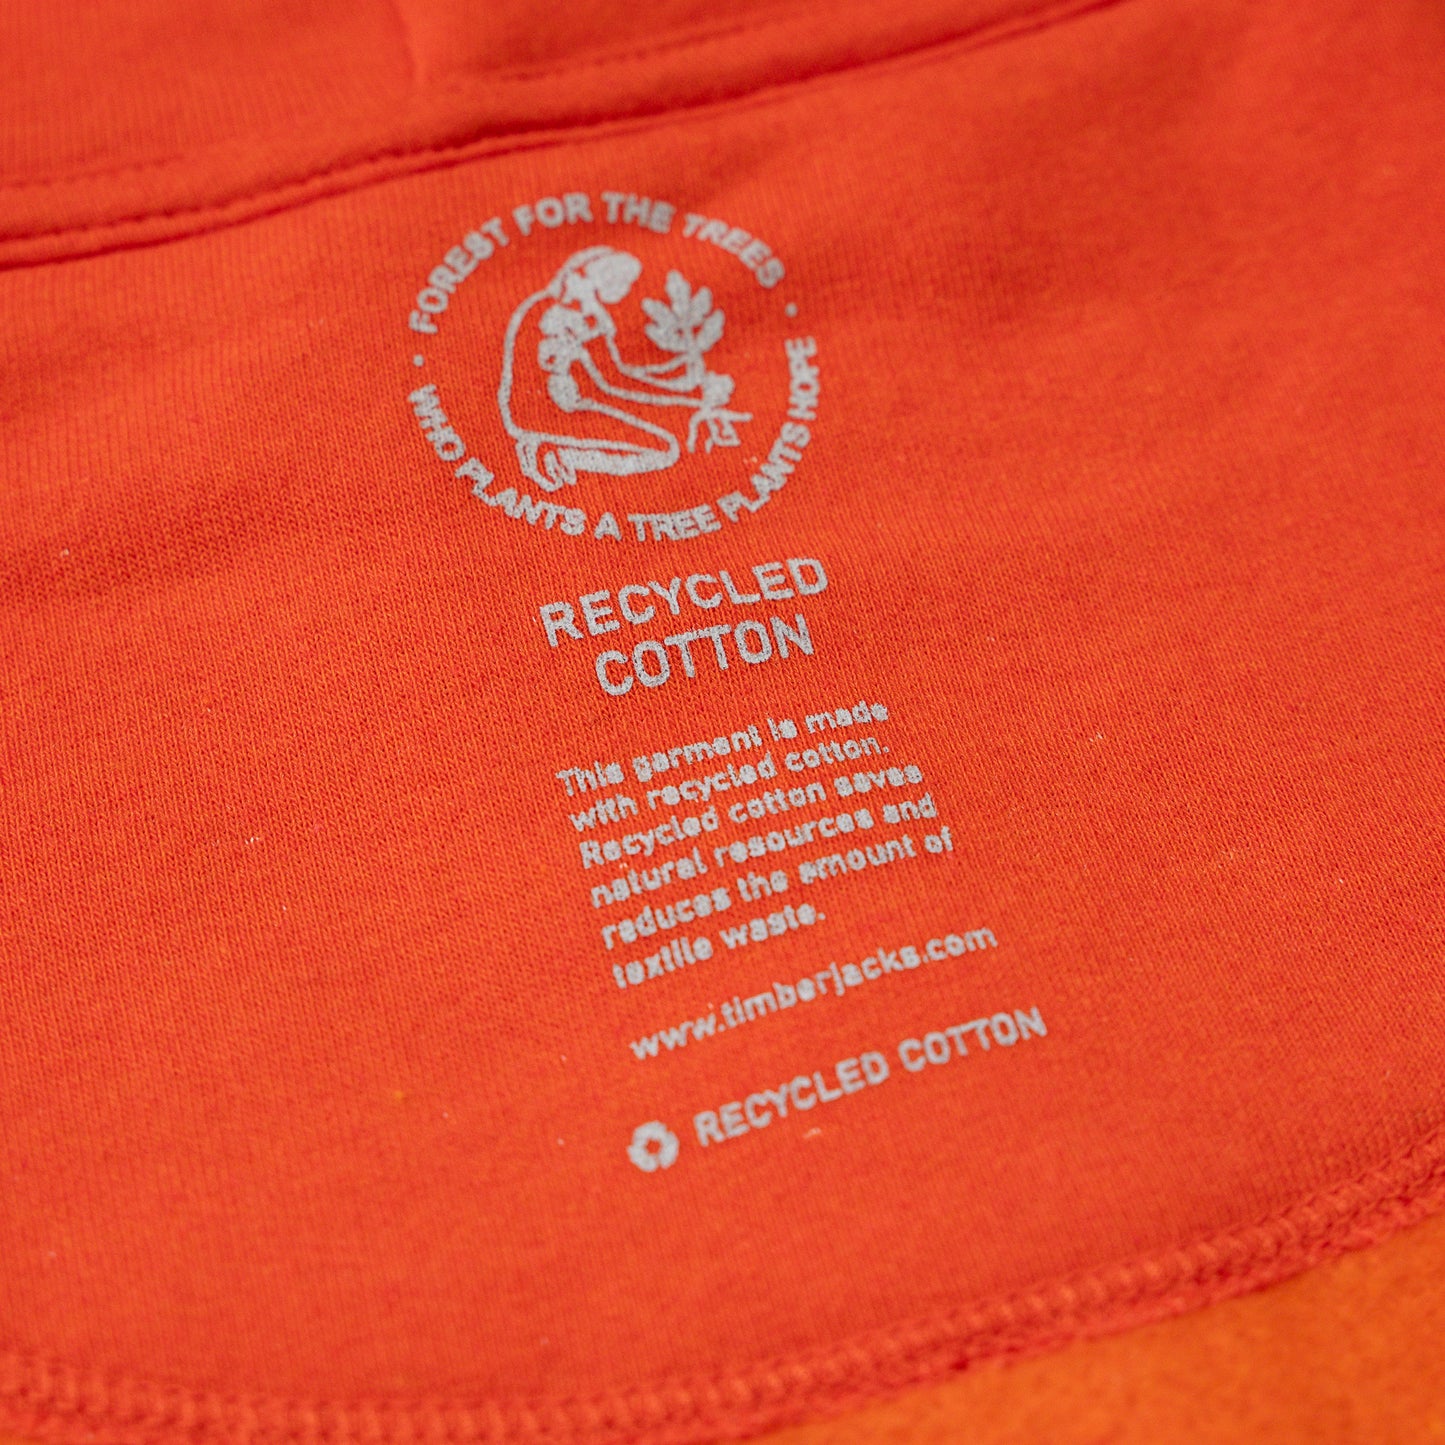 Hoodie Forest for the trees Orange Recycled Cotton